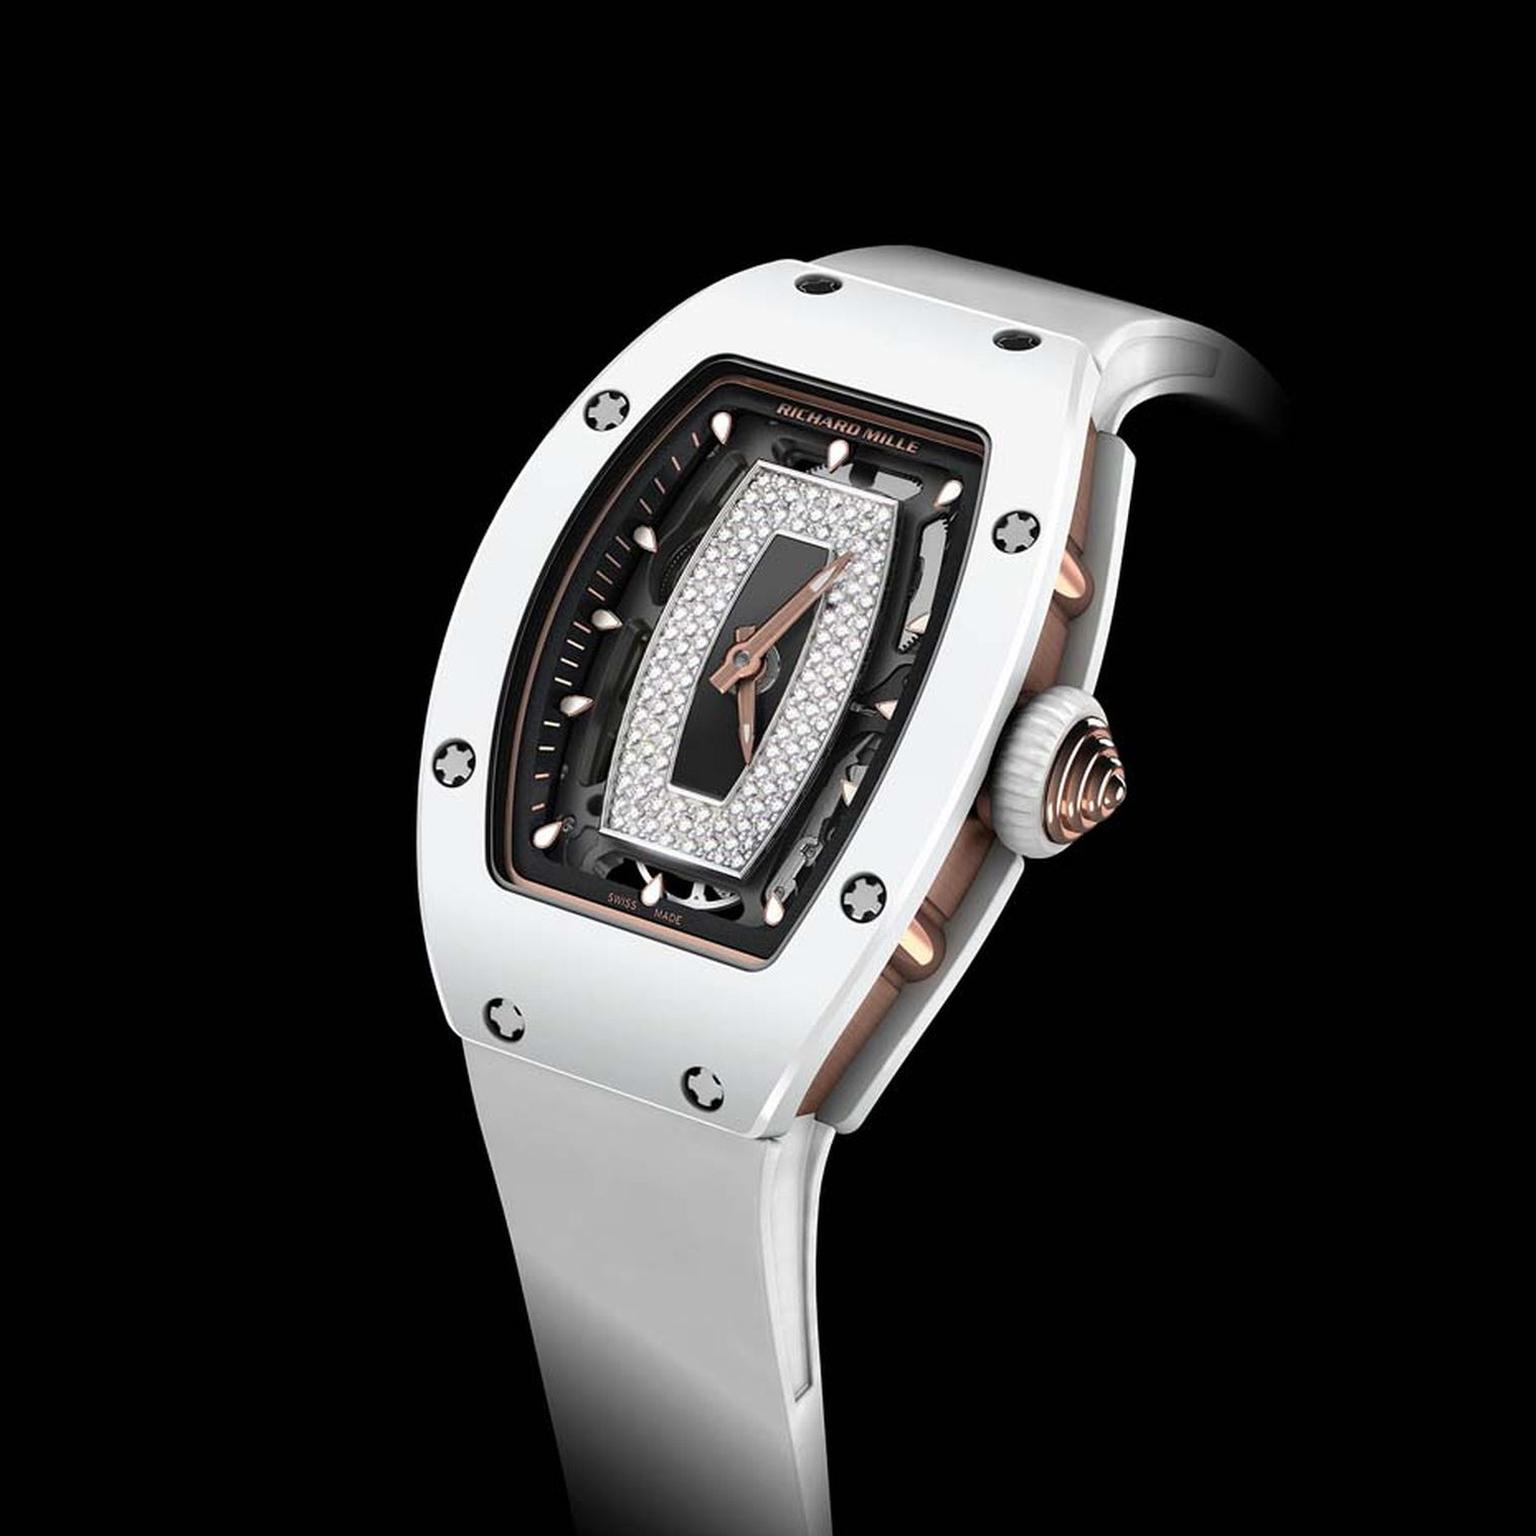 Another first for the Richard Mille ladies’ collection, the RM07-01 tripartite case is available in a choice of white ATZ ceramic or warm brown TZP ceramic - both with a red gold case band, providing visual contrast and an extremely high level of scratch 